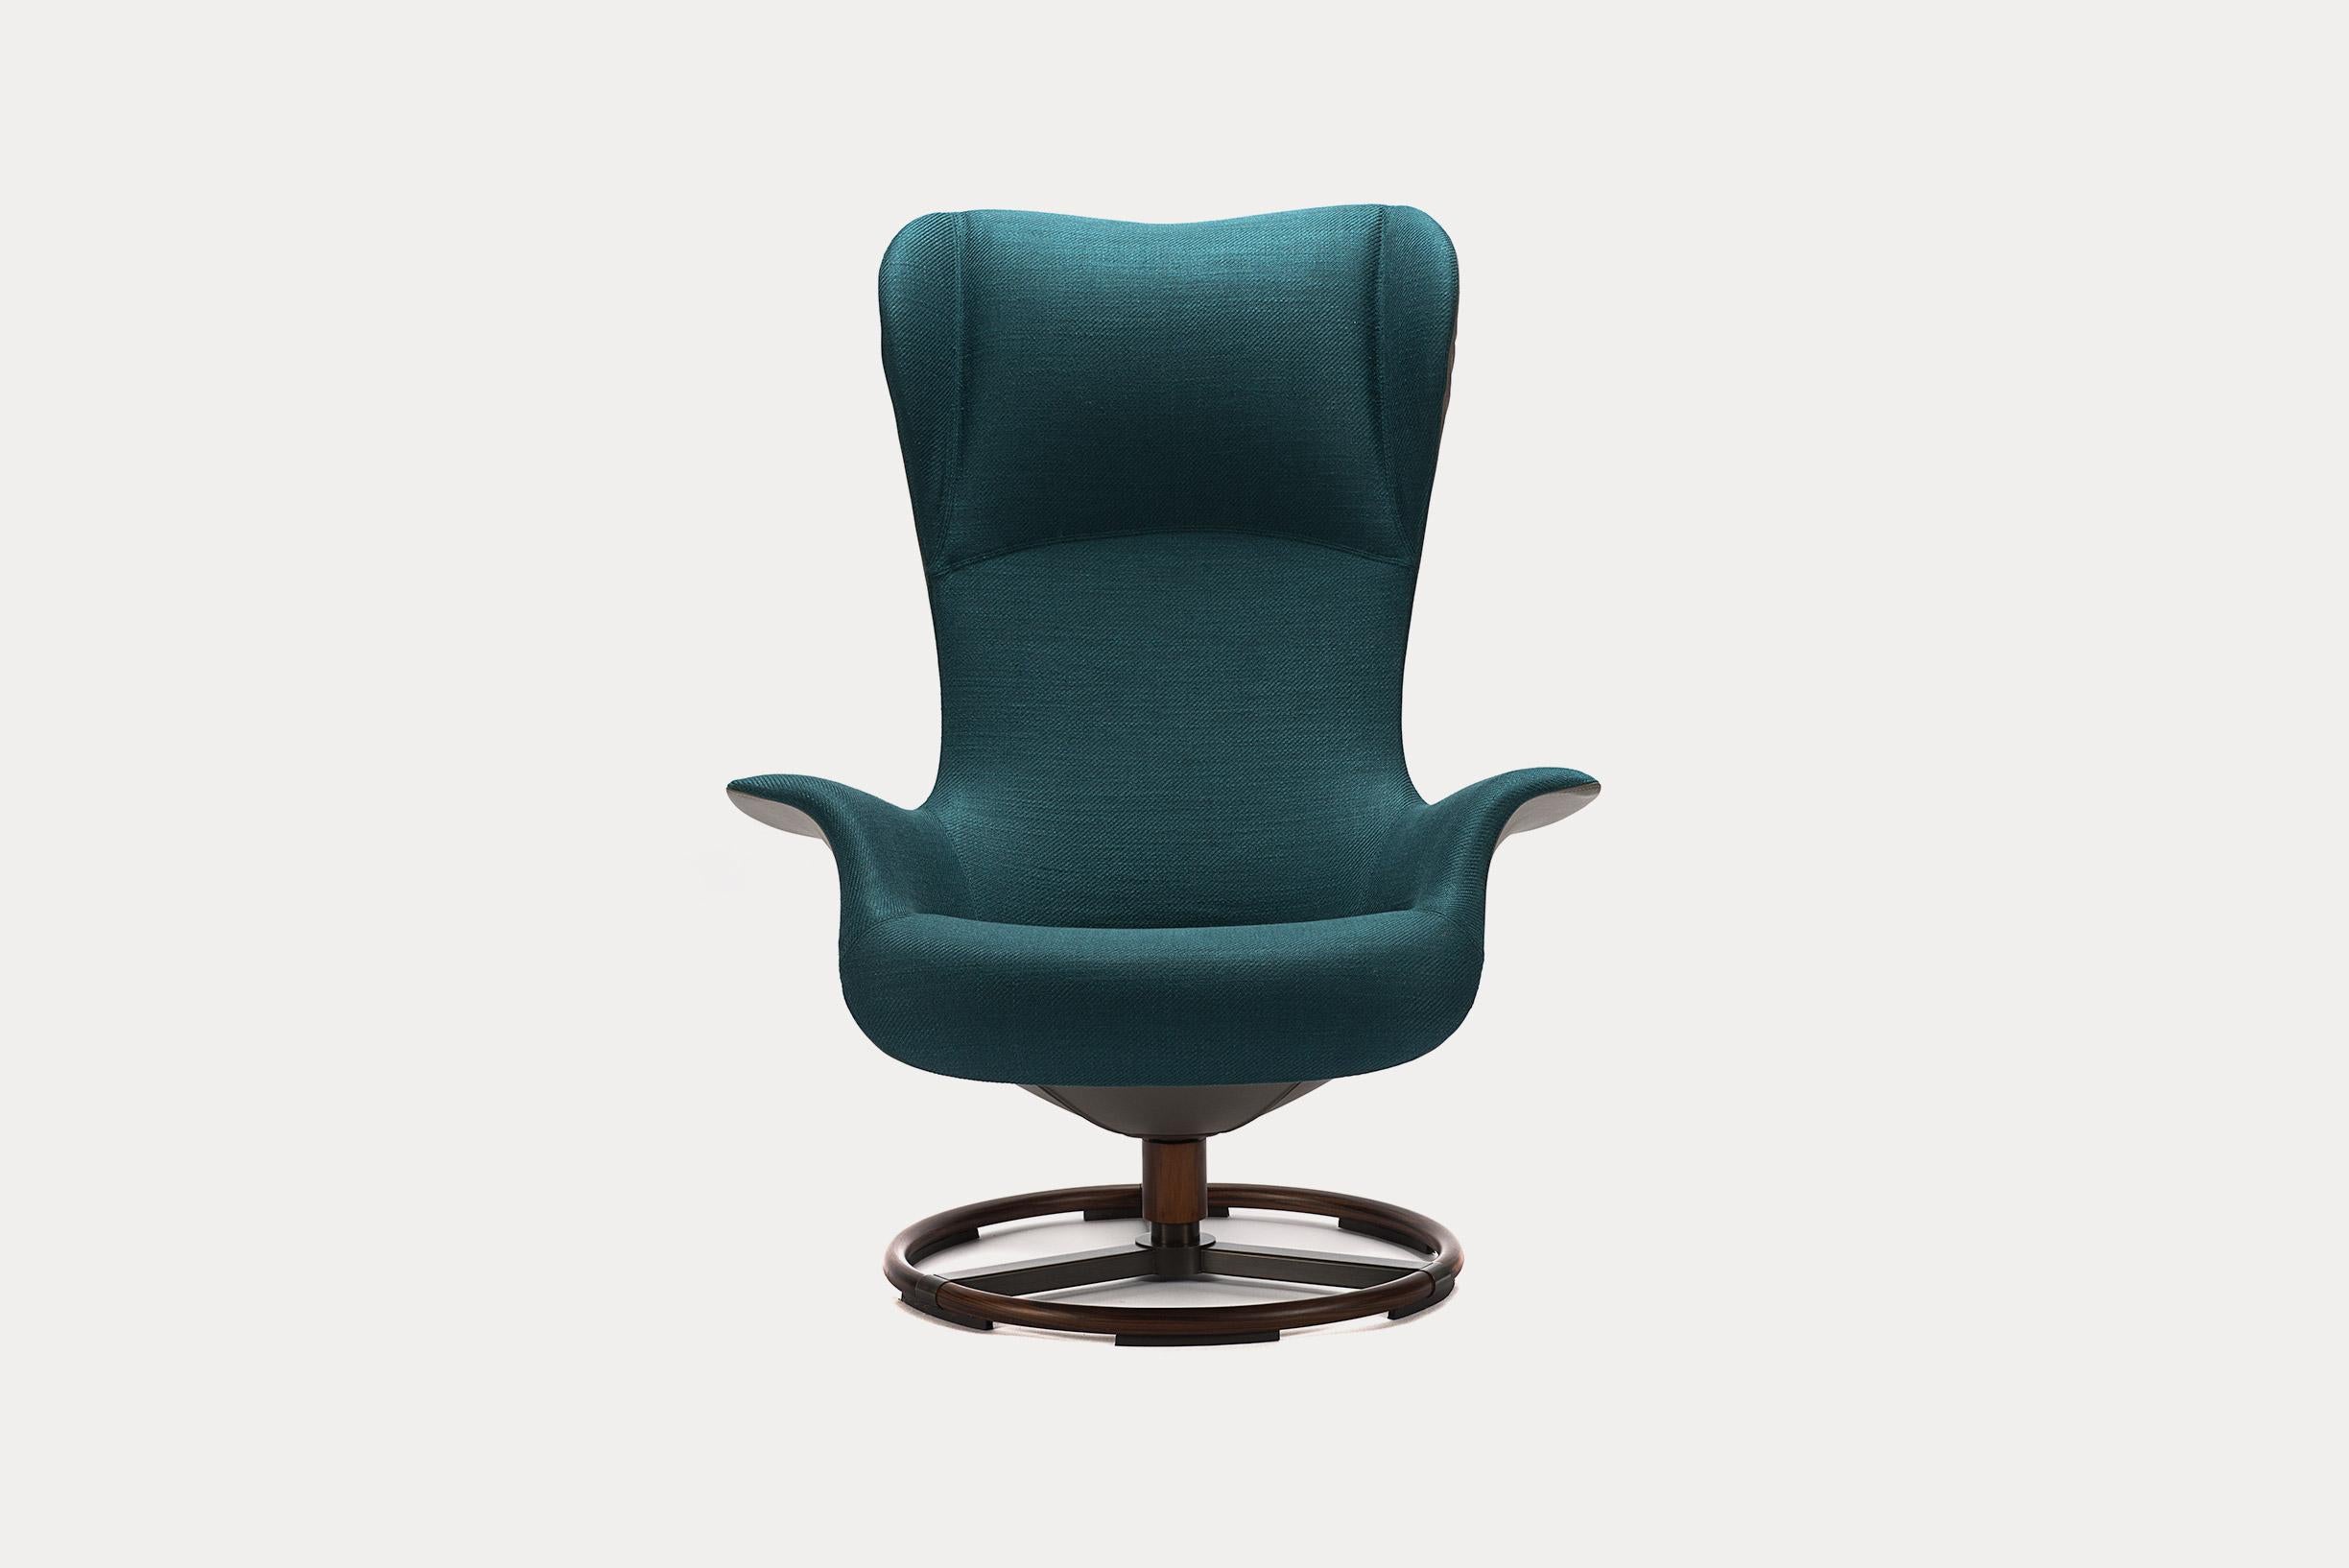 The Giorgetti Tilt swivel wing chair is an innovative armchair that offers a new standard of comfort, for a product that follows the movement of those taking a seat in its enveloping shape. Of nautical inspiration, Tilt is characterized by an